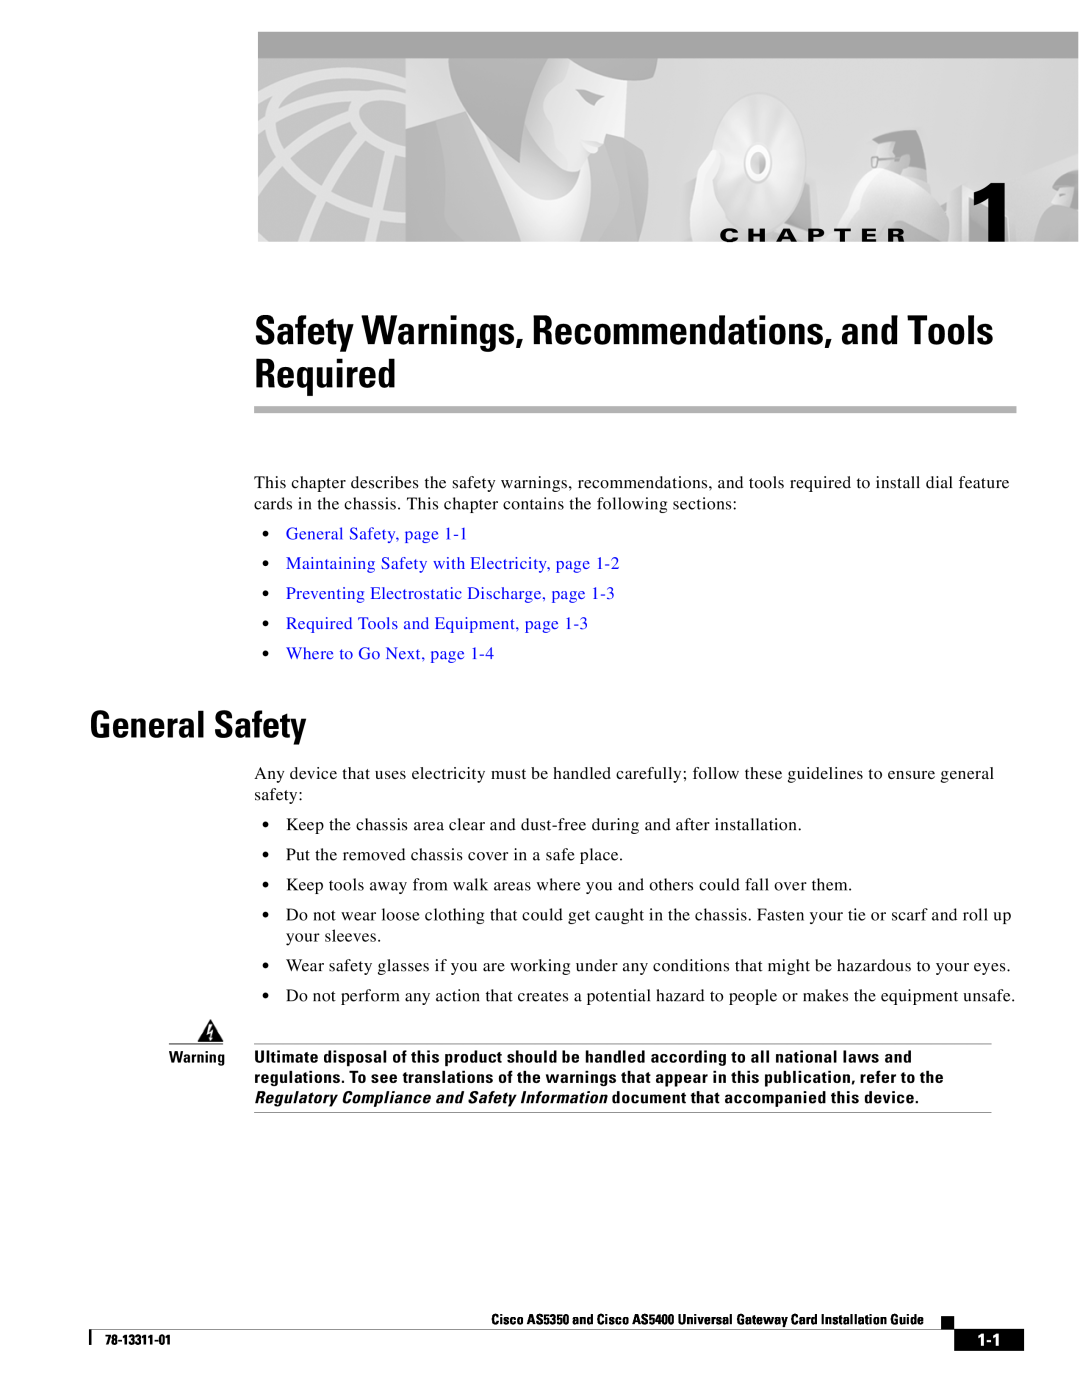 Cisco Systems AS5400 manual Safety Warnings, Recommendations, and Tools Required, General Safety, C H A P T E R 